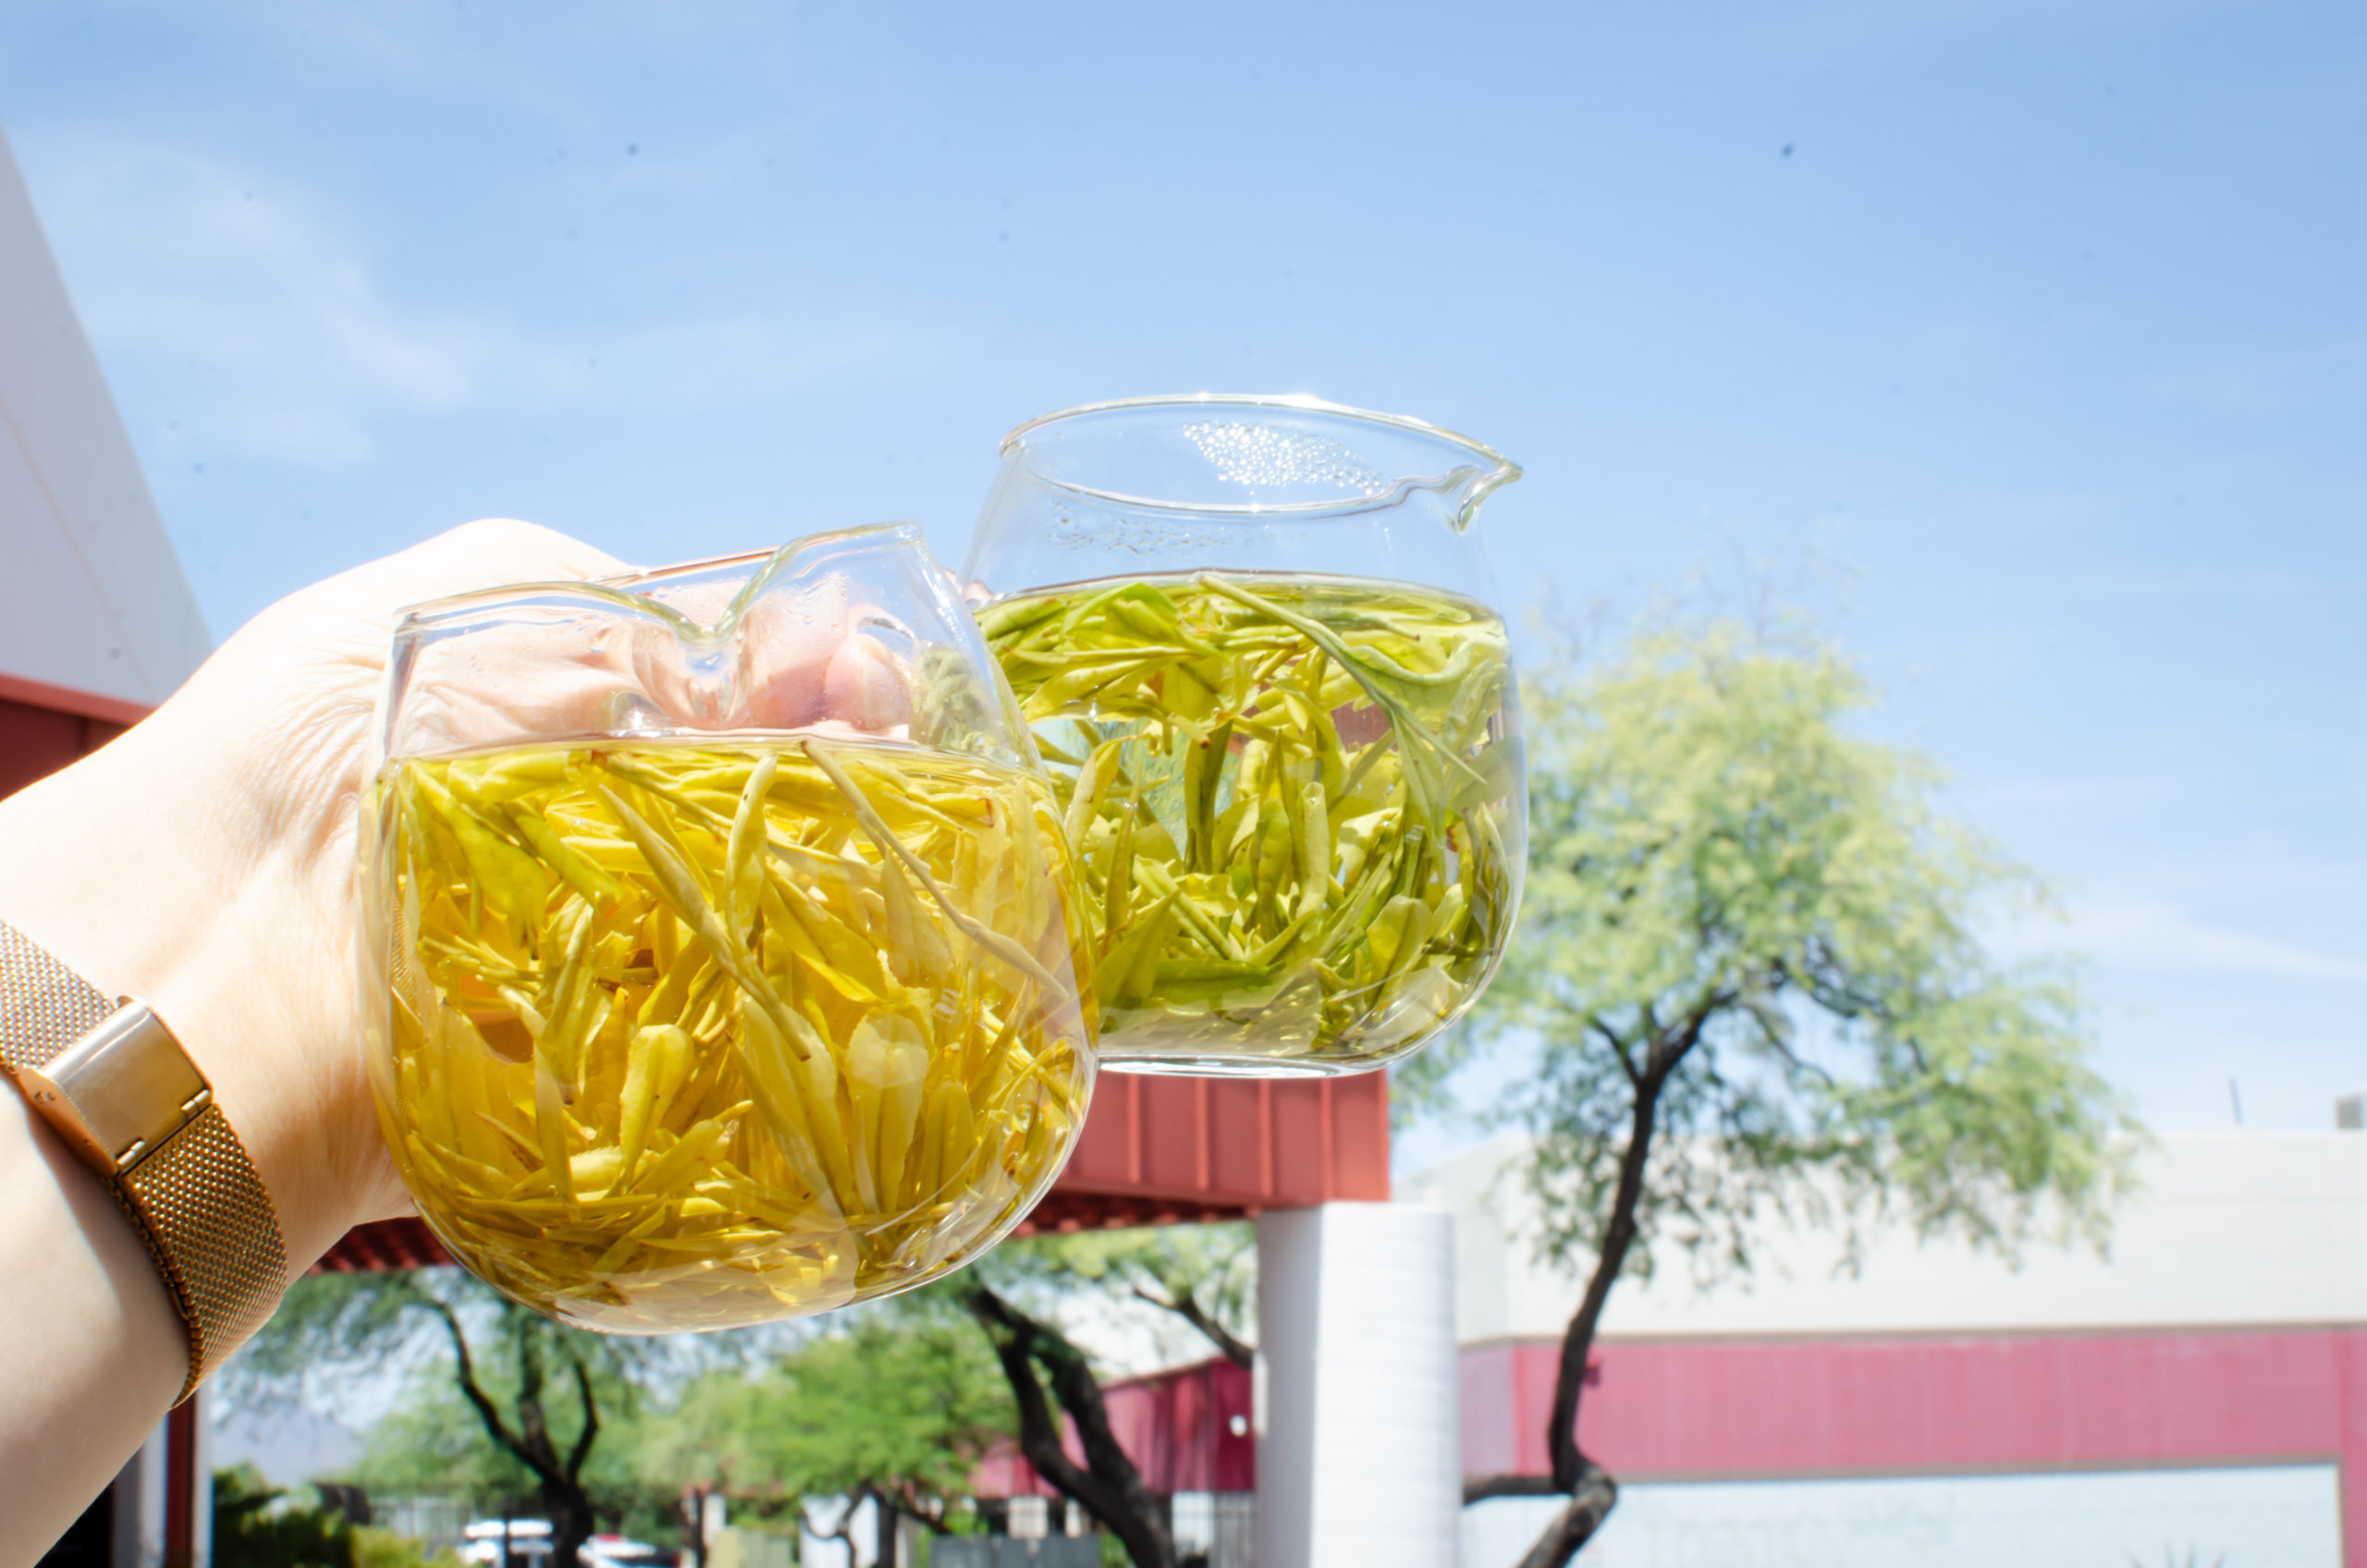 A hand holding up two glass pitchers of tea outdoors in the sun: one with bright yellow leaves and one with pale green.